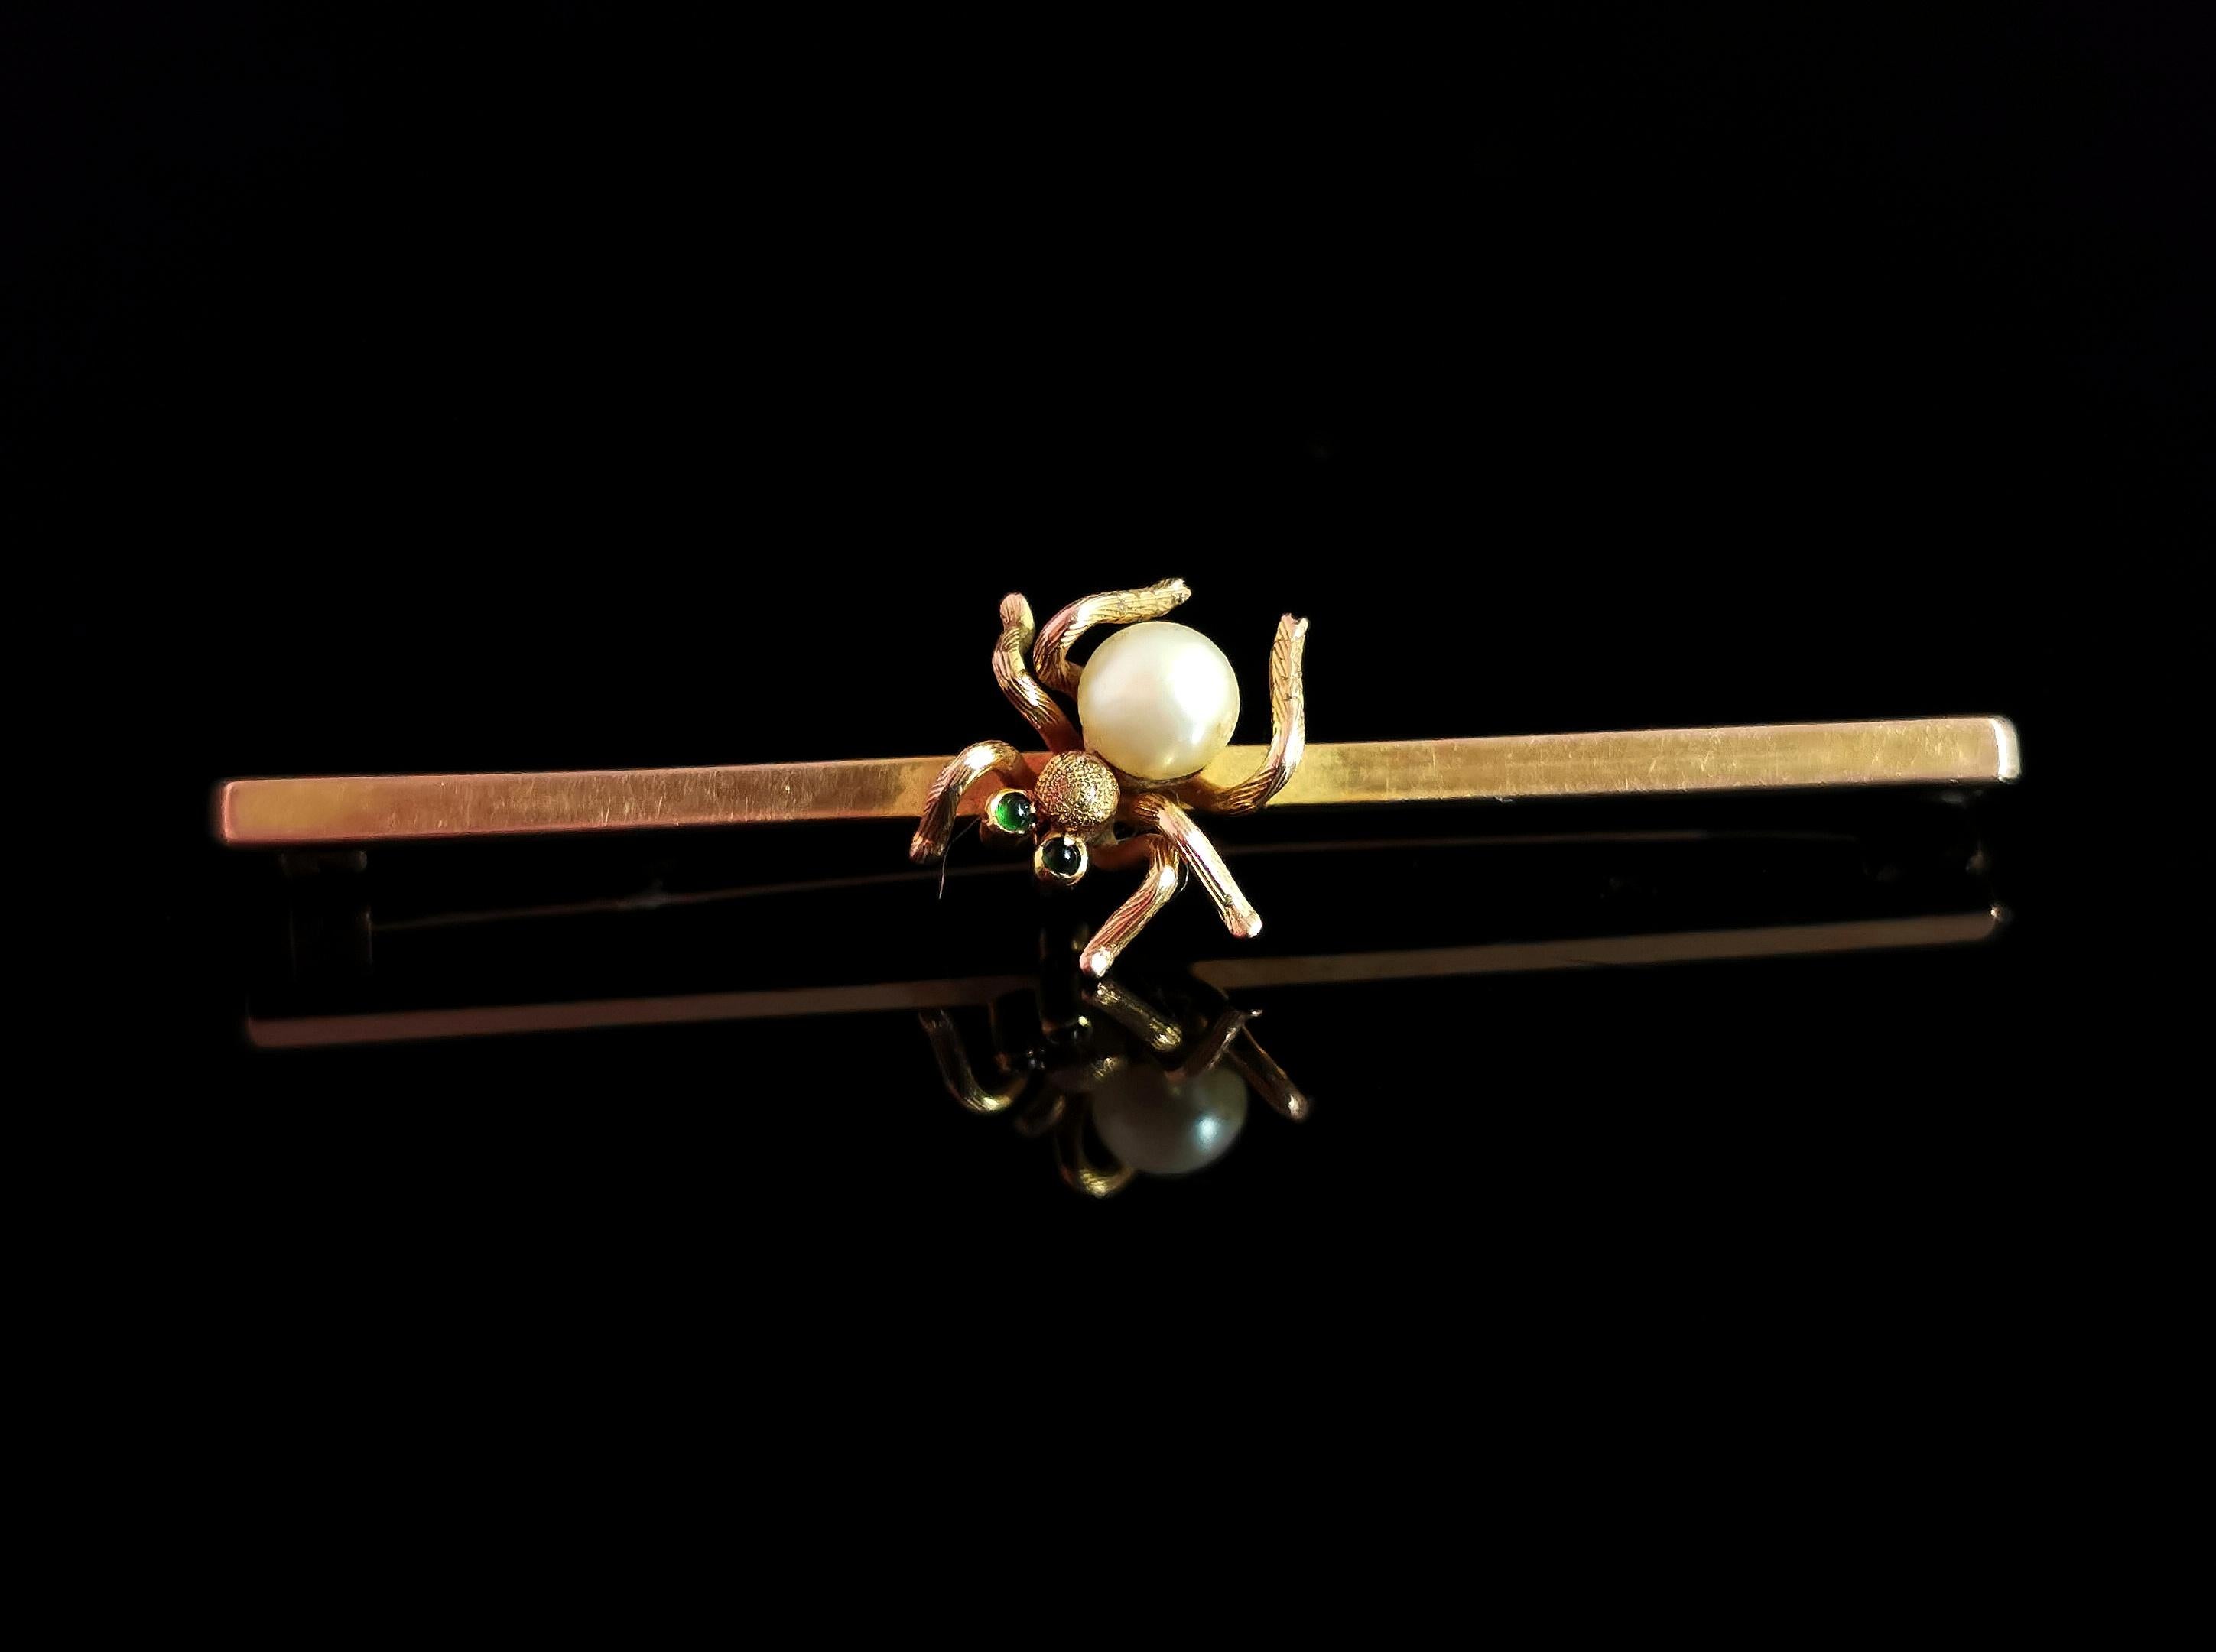 A gorgeous antique, early Edwardian 9ct gold spider brooch.

The body is made from a beautiful cultured pearl with cool tones and the eyes are set with tiny demantoid garnet cabochons.

Set into 9ct yellow gold and mounted onto a 9ct gold bar